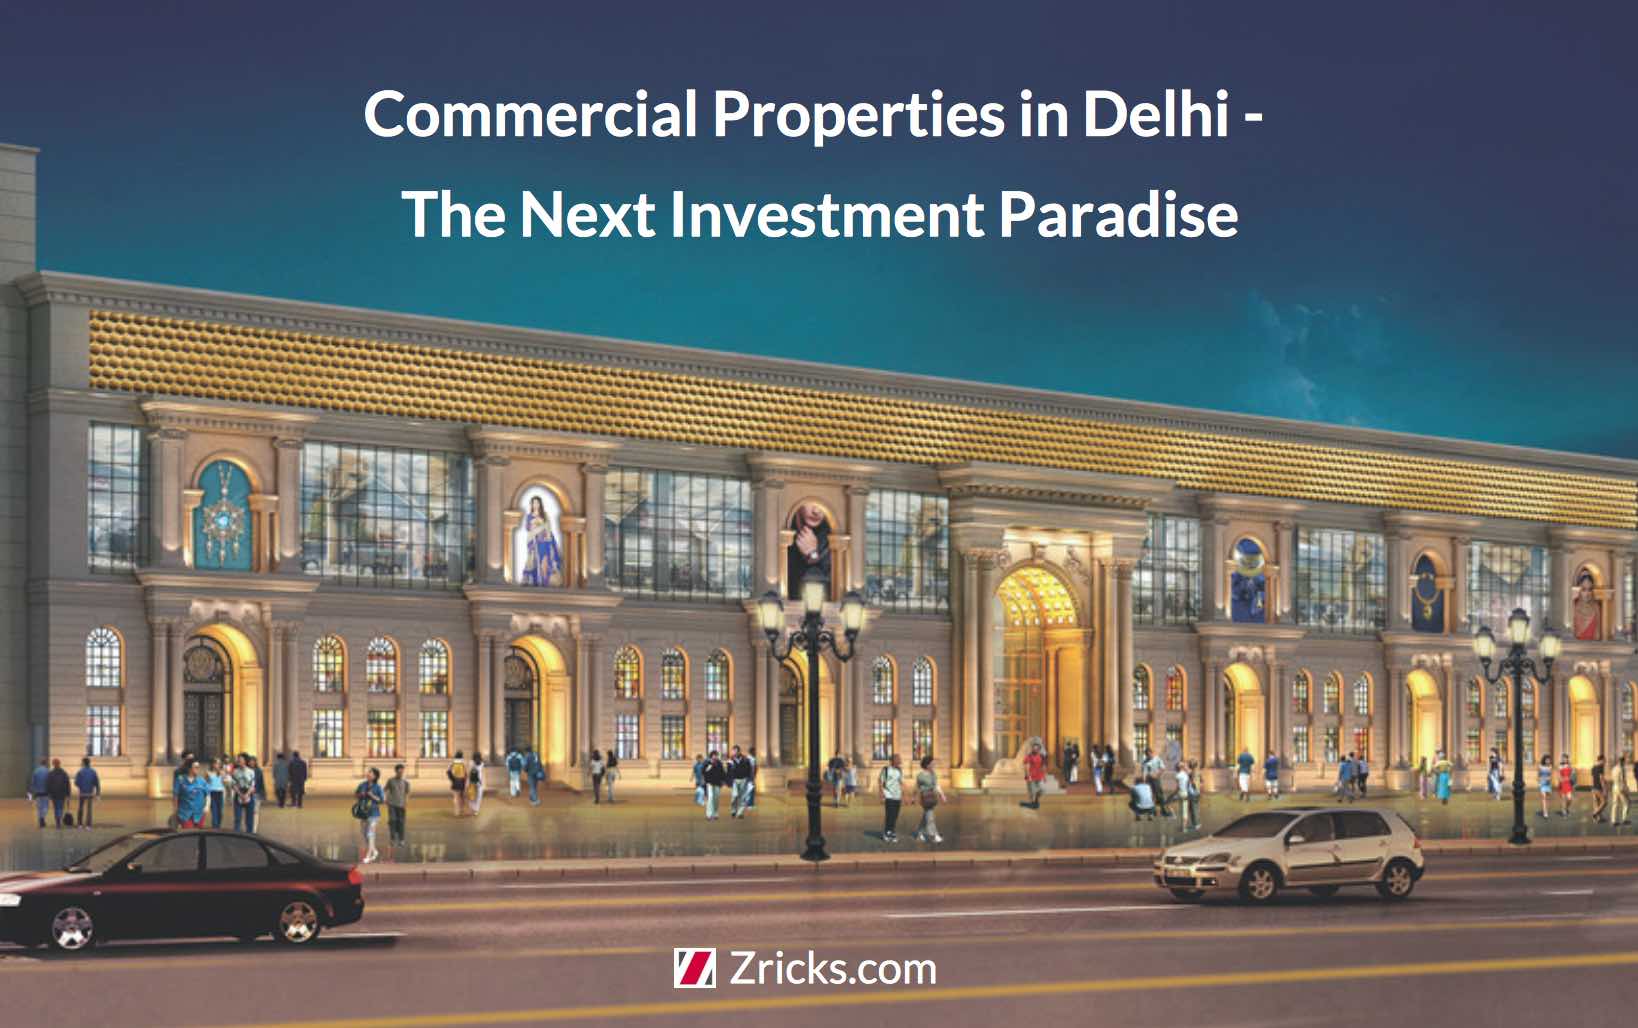 Commercial Properties in Delhi - The Next Investment Paradise